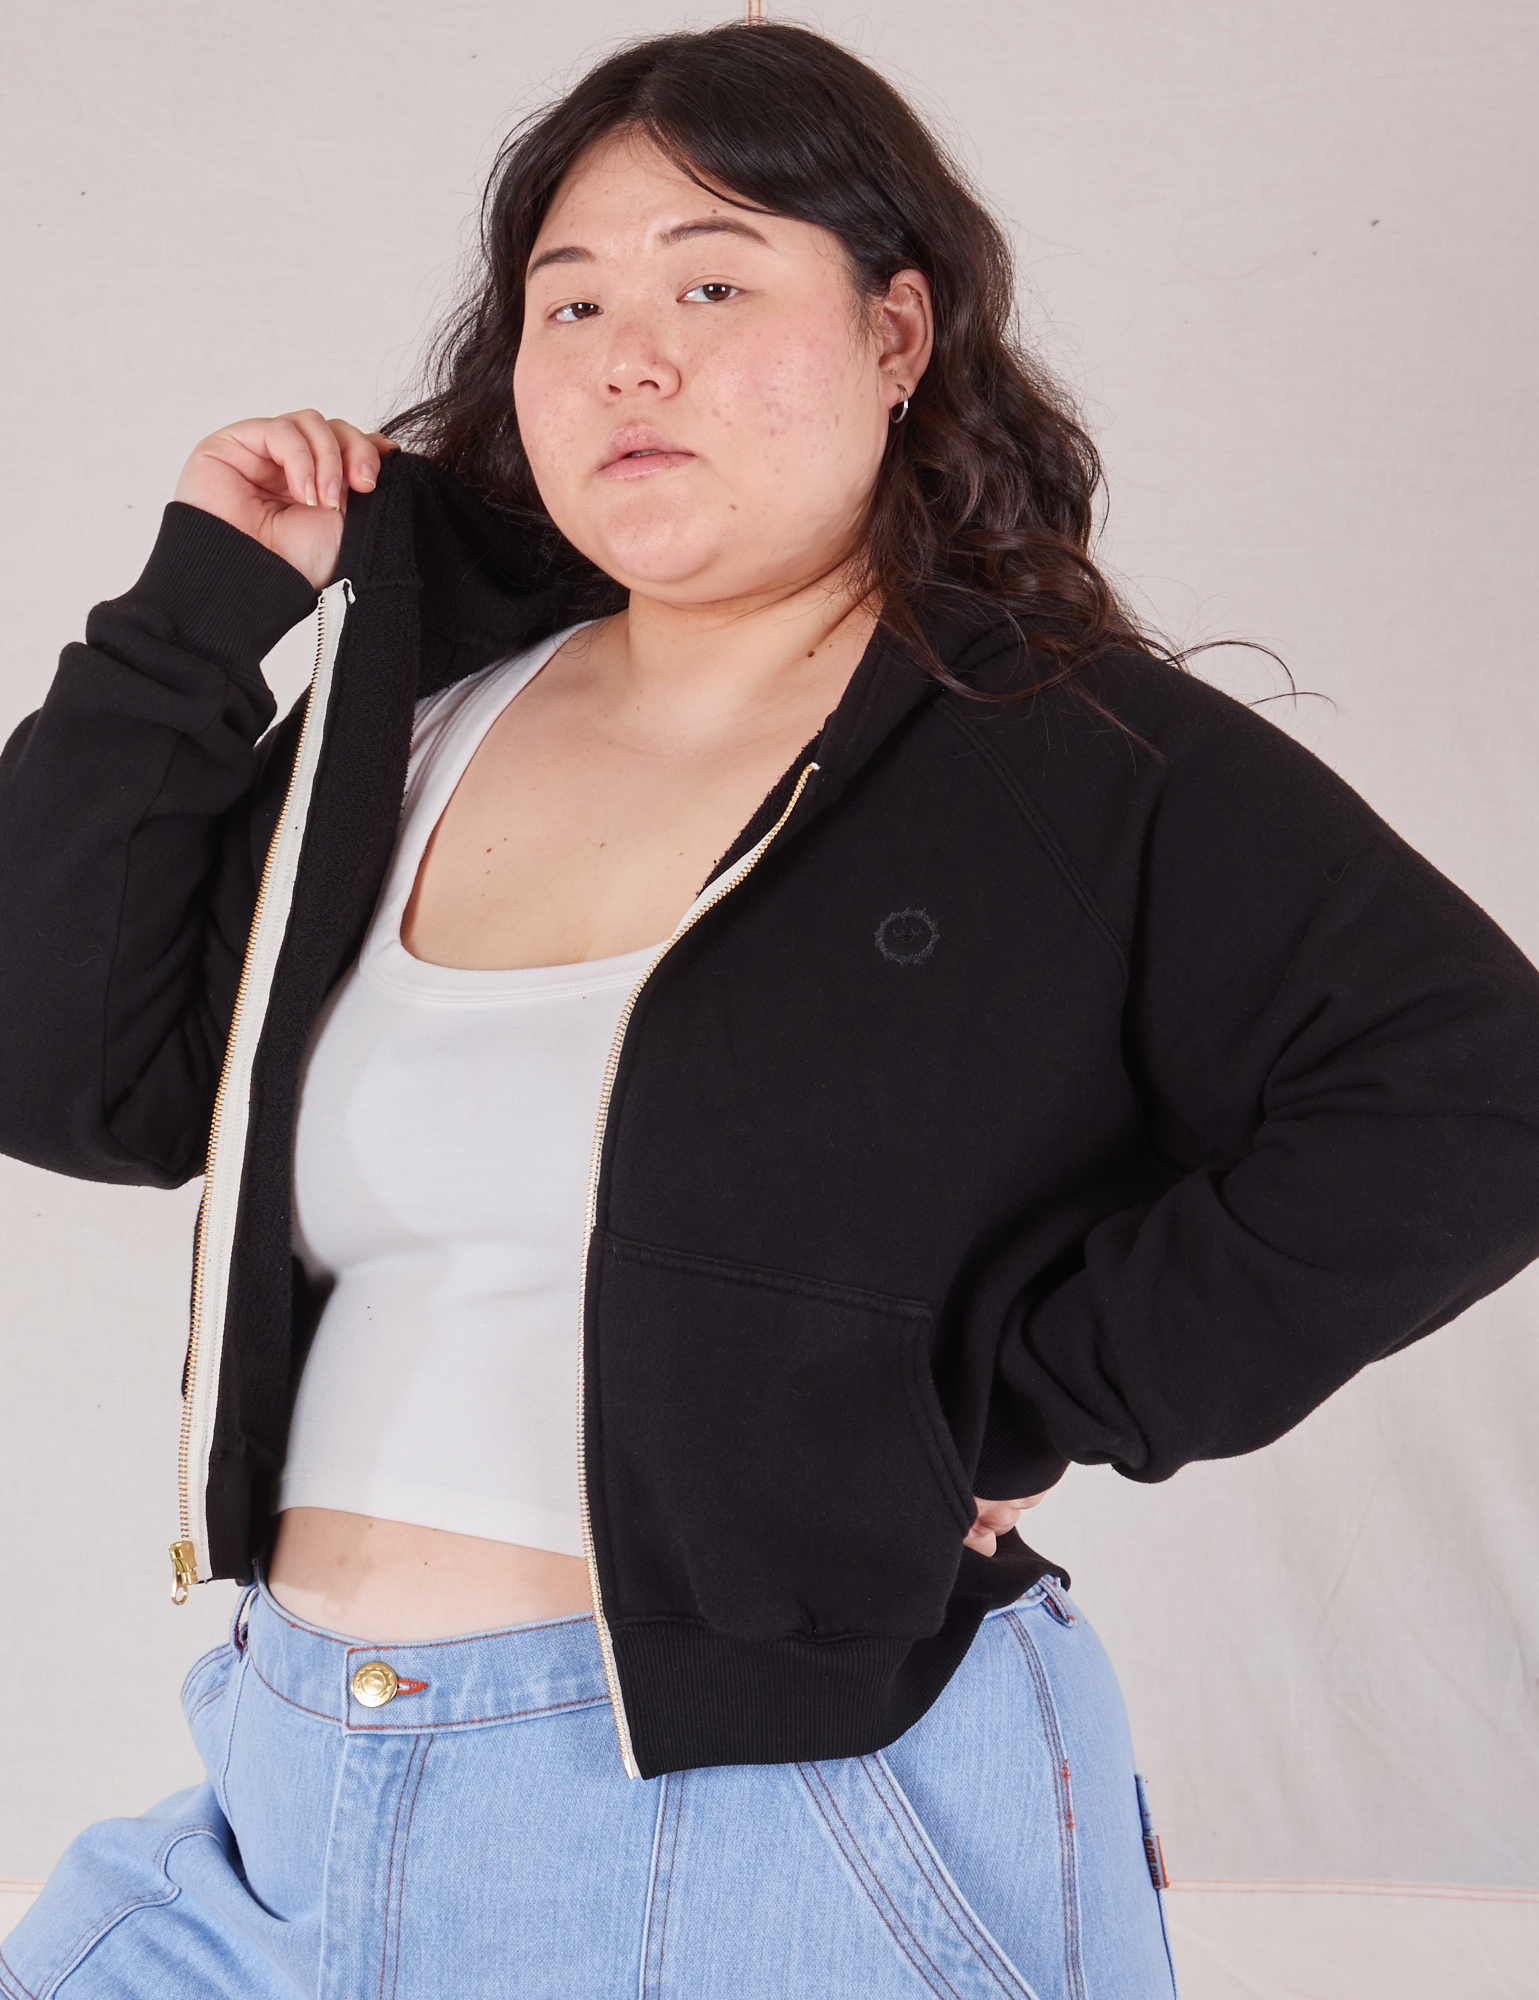 Cropped Zip Hoodie in Basic Black angled front view on Ashley